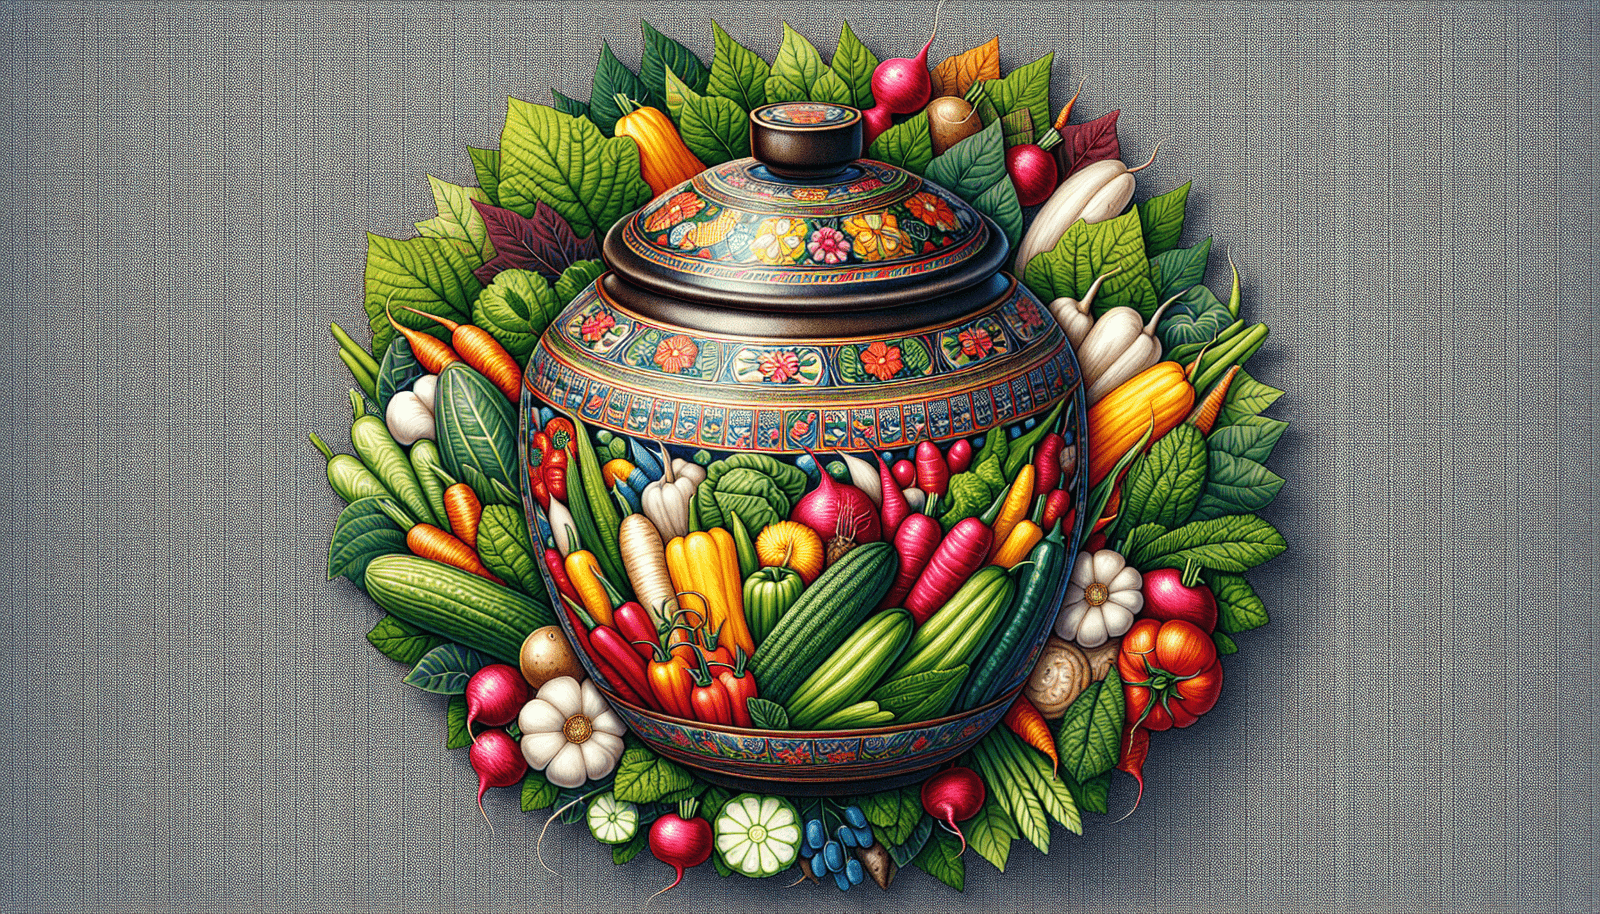 Can You Share Insights Into The Art Of Pickling And Preserving In Korean Cuisine?